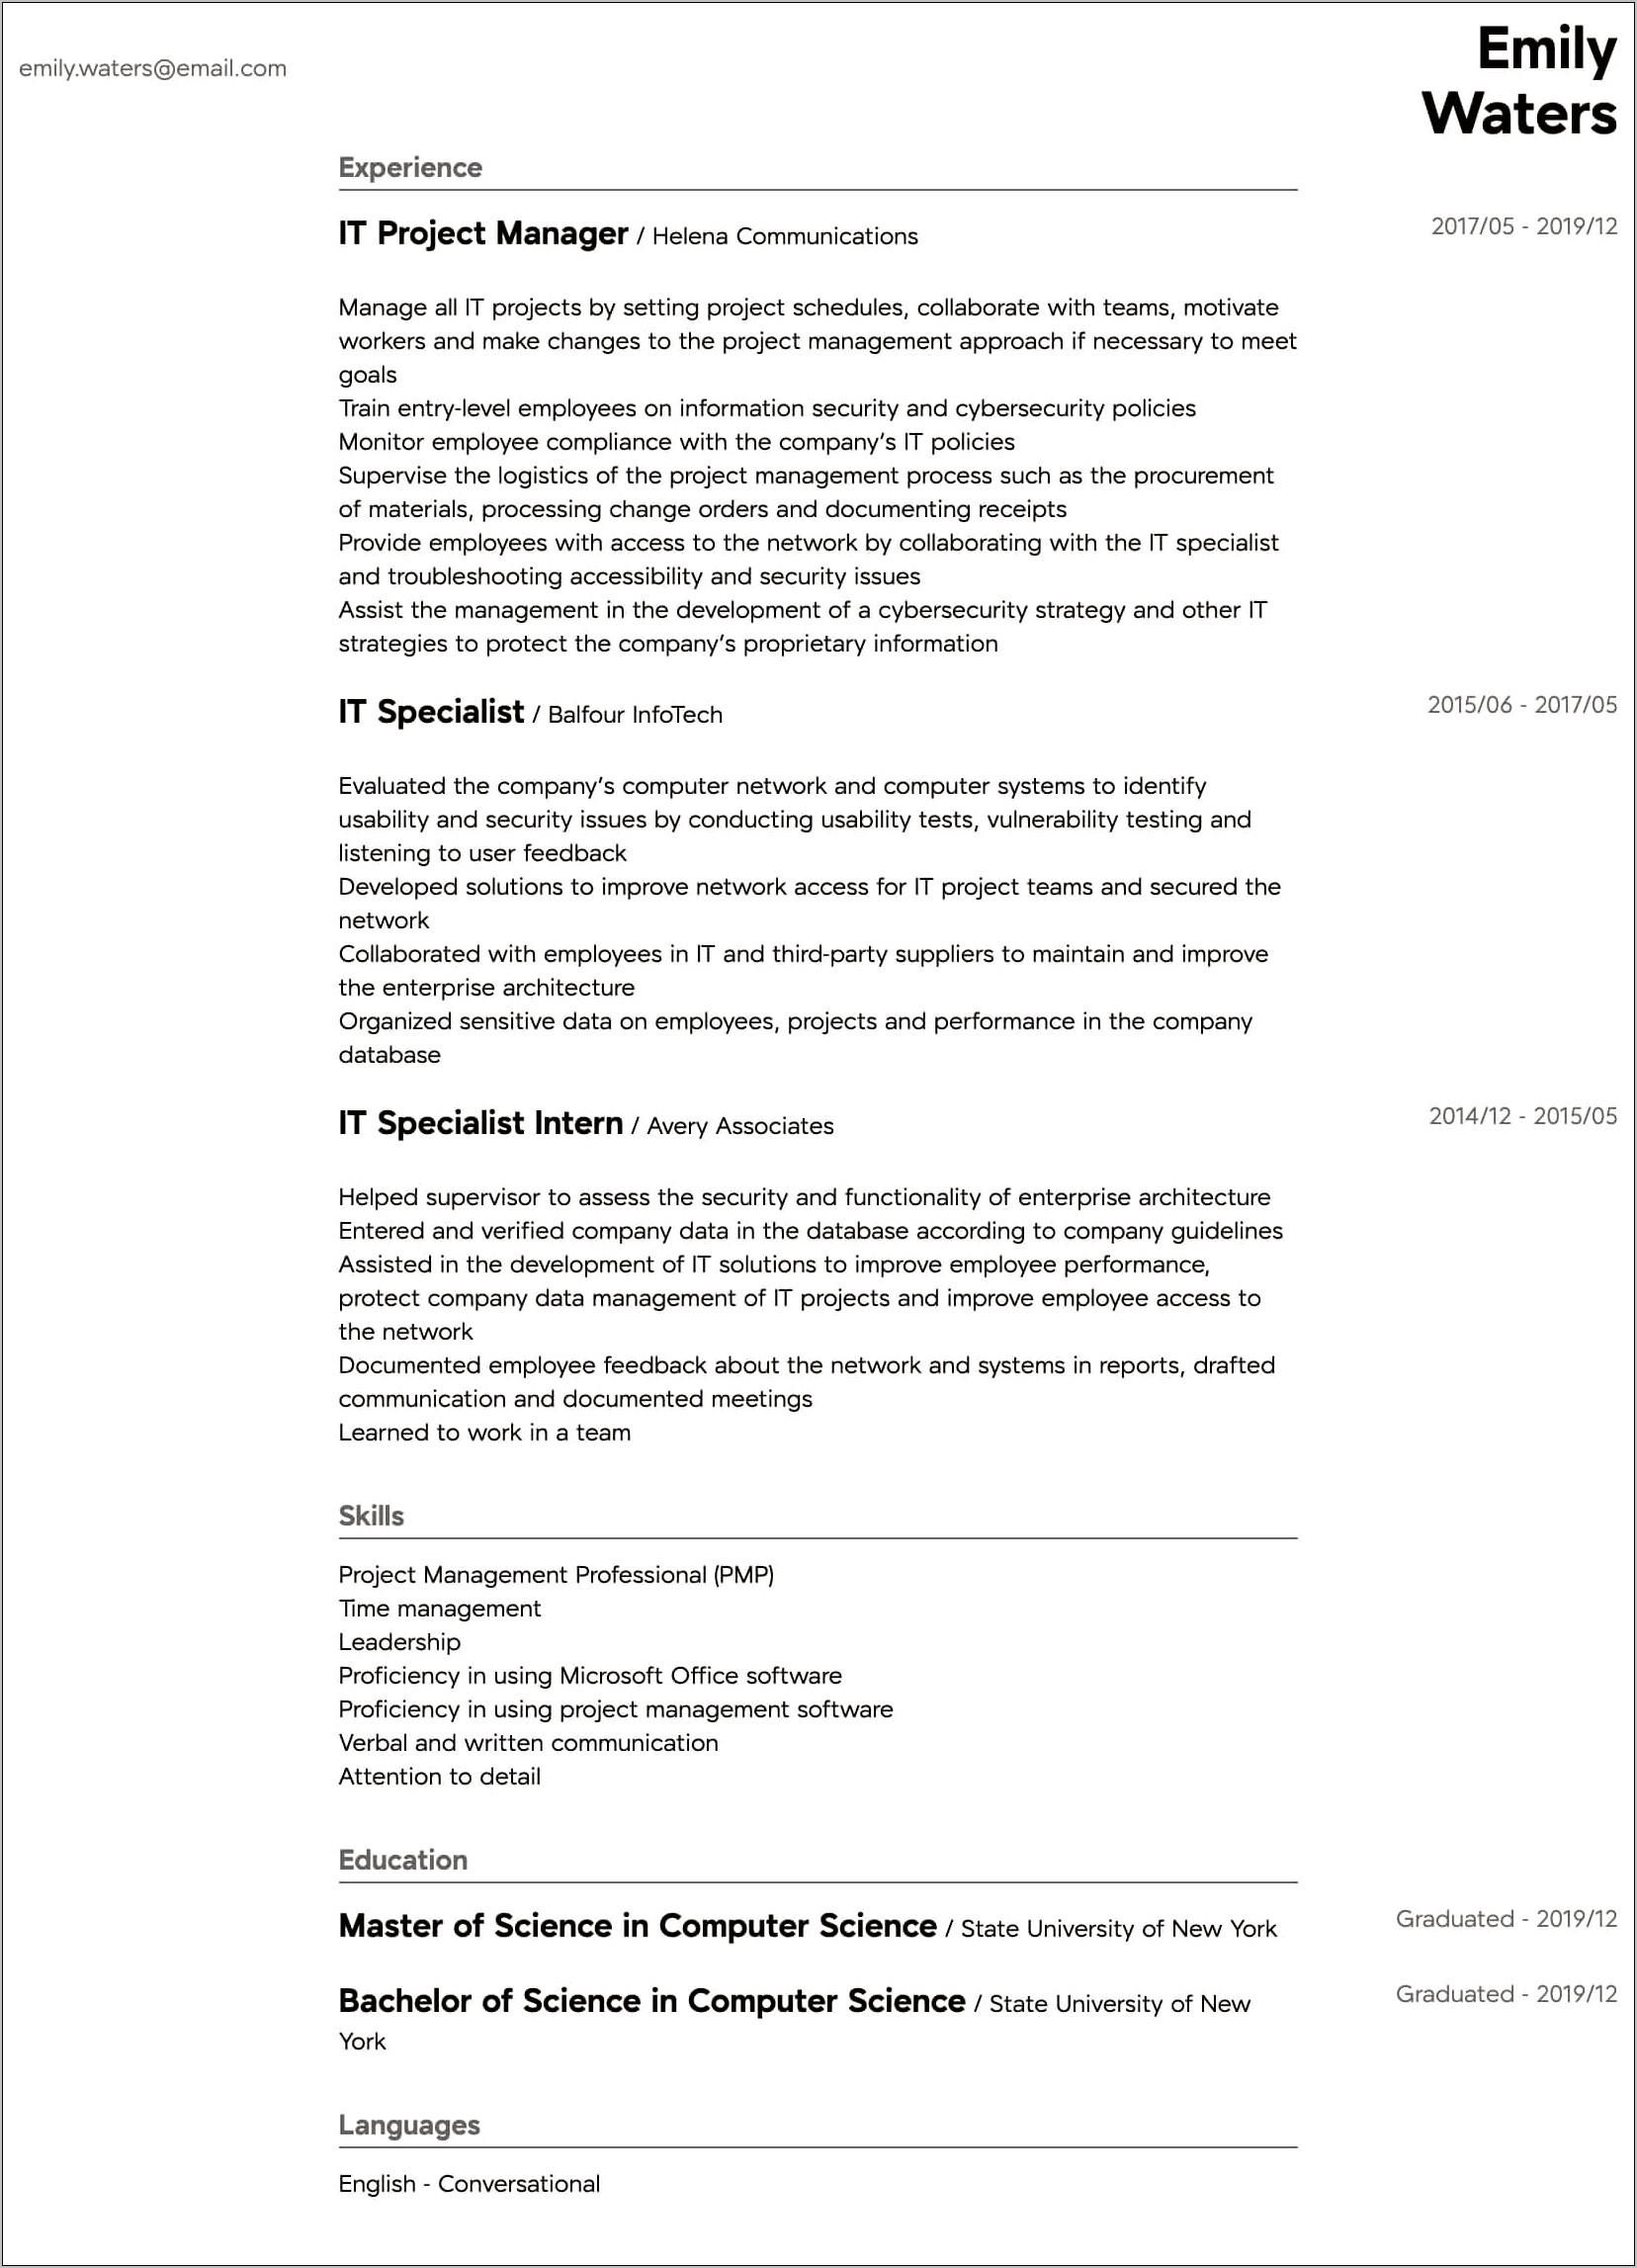 Project Manager Experience Description For Resume